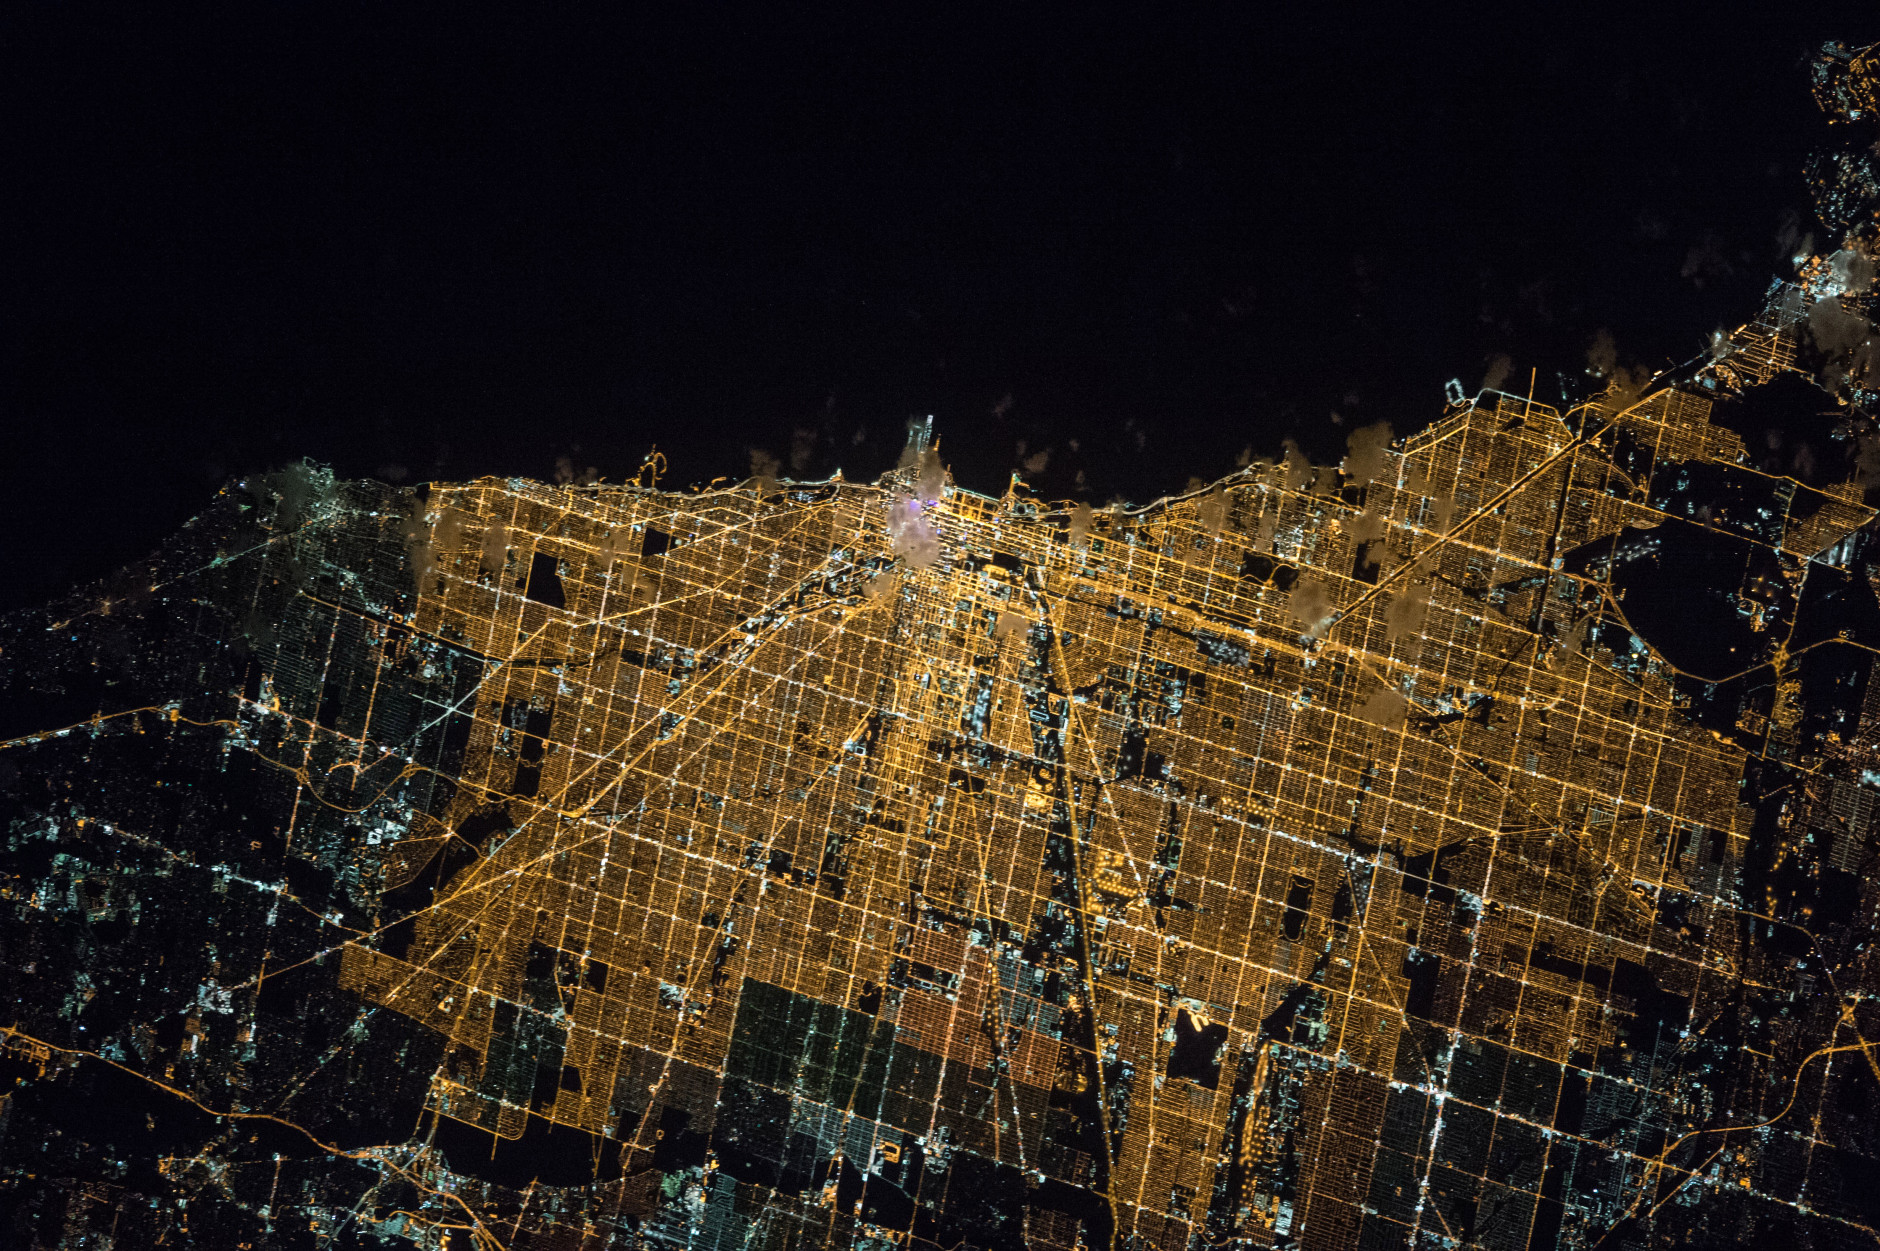 Expedition 47 Commander Tim Kopra of NASA captured this brightly lit night image of the city of Chicago on April 5, 2016, from the International Space Station. Kopra (@astro_tim) wrote, "#Goodnight #Chicago from @Space_Station. #CitiesFromSpace"